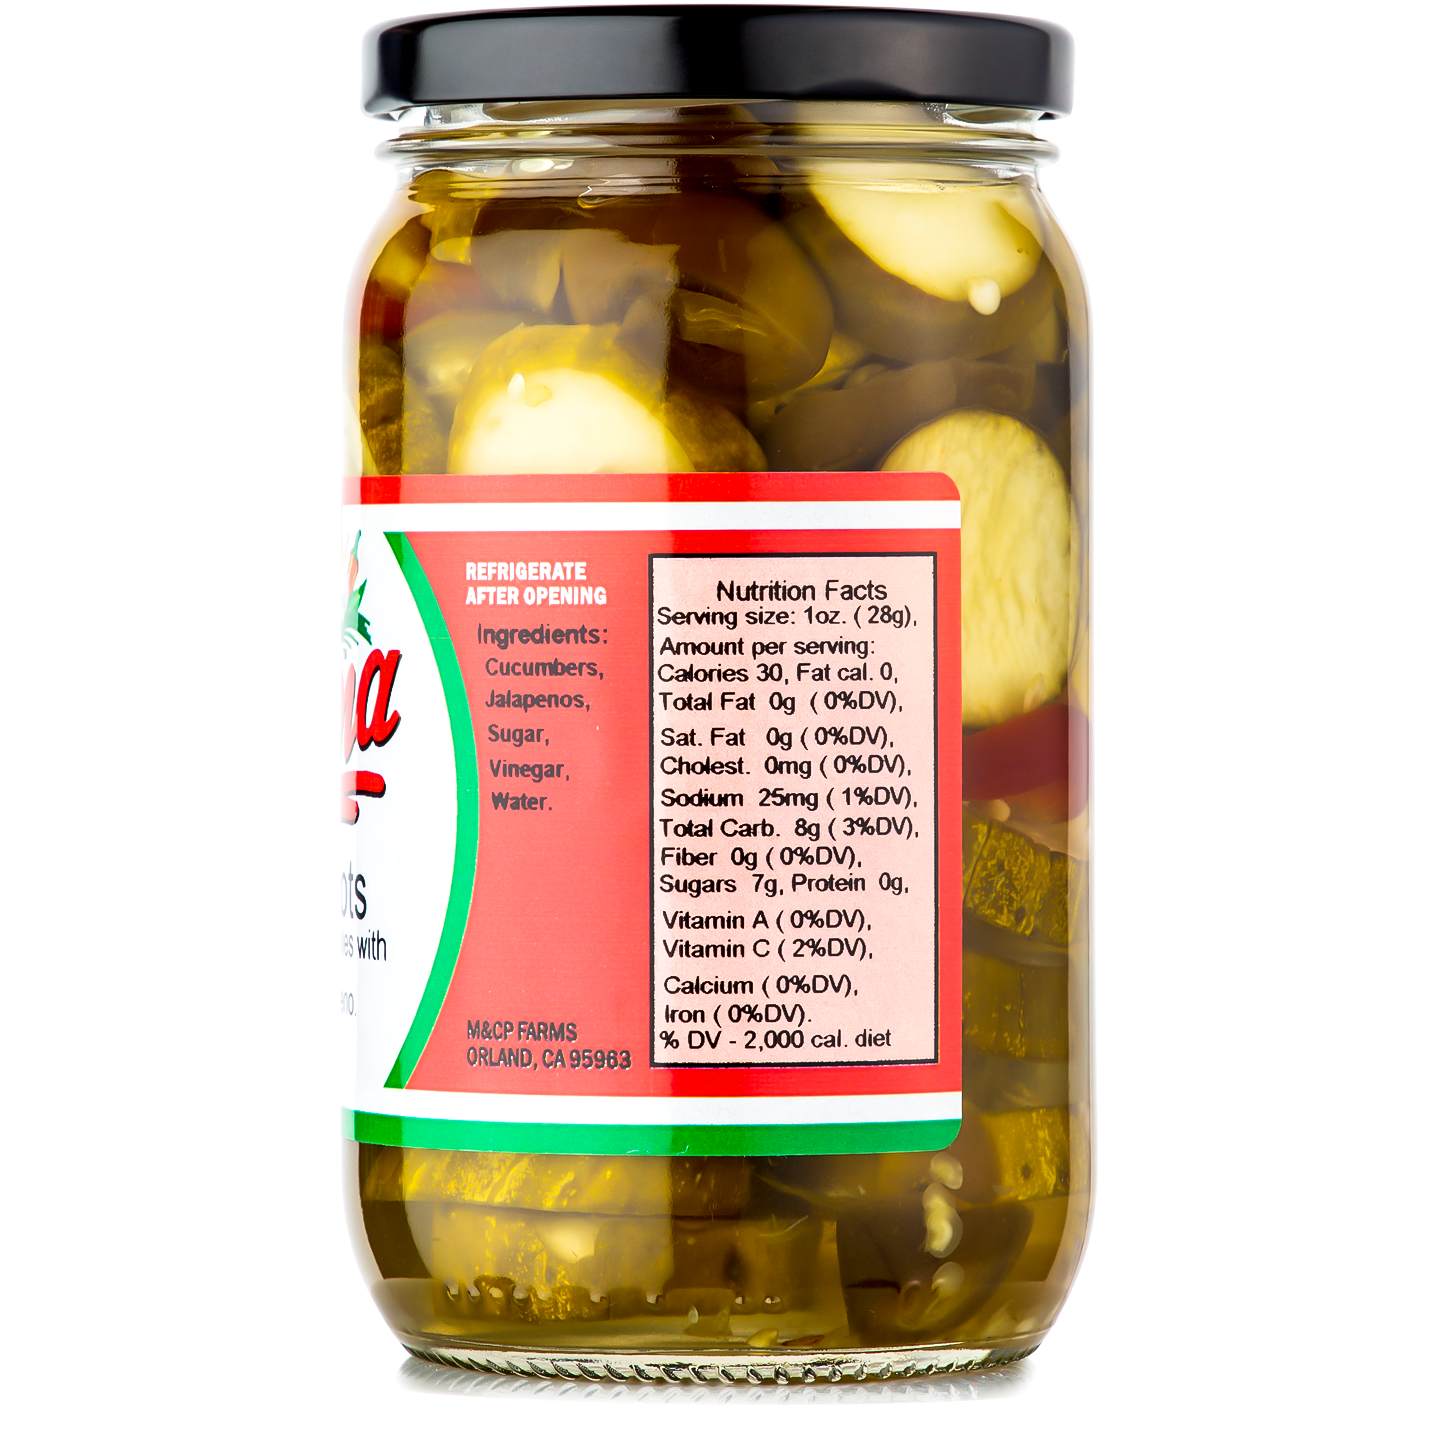 Sweet-Hots (Sliced Pickles with Jalapeño)